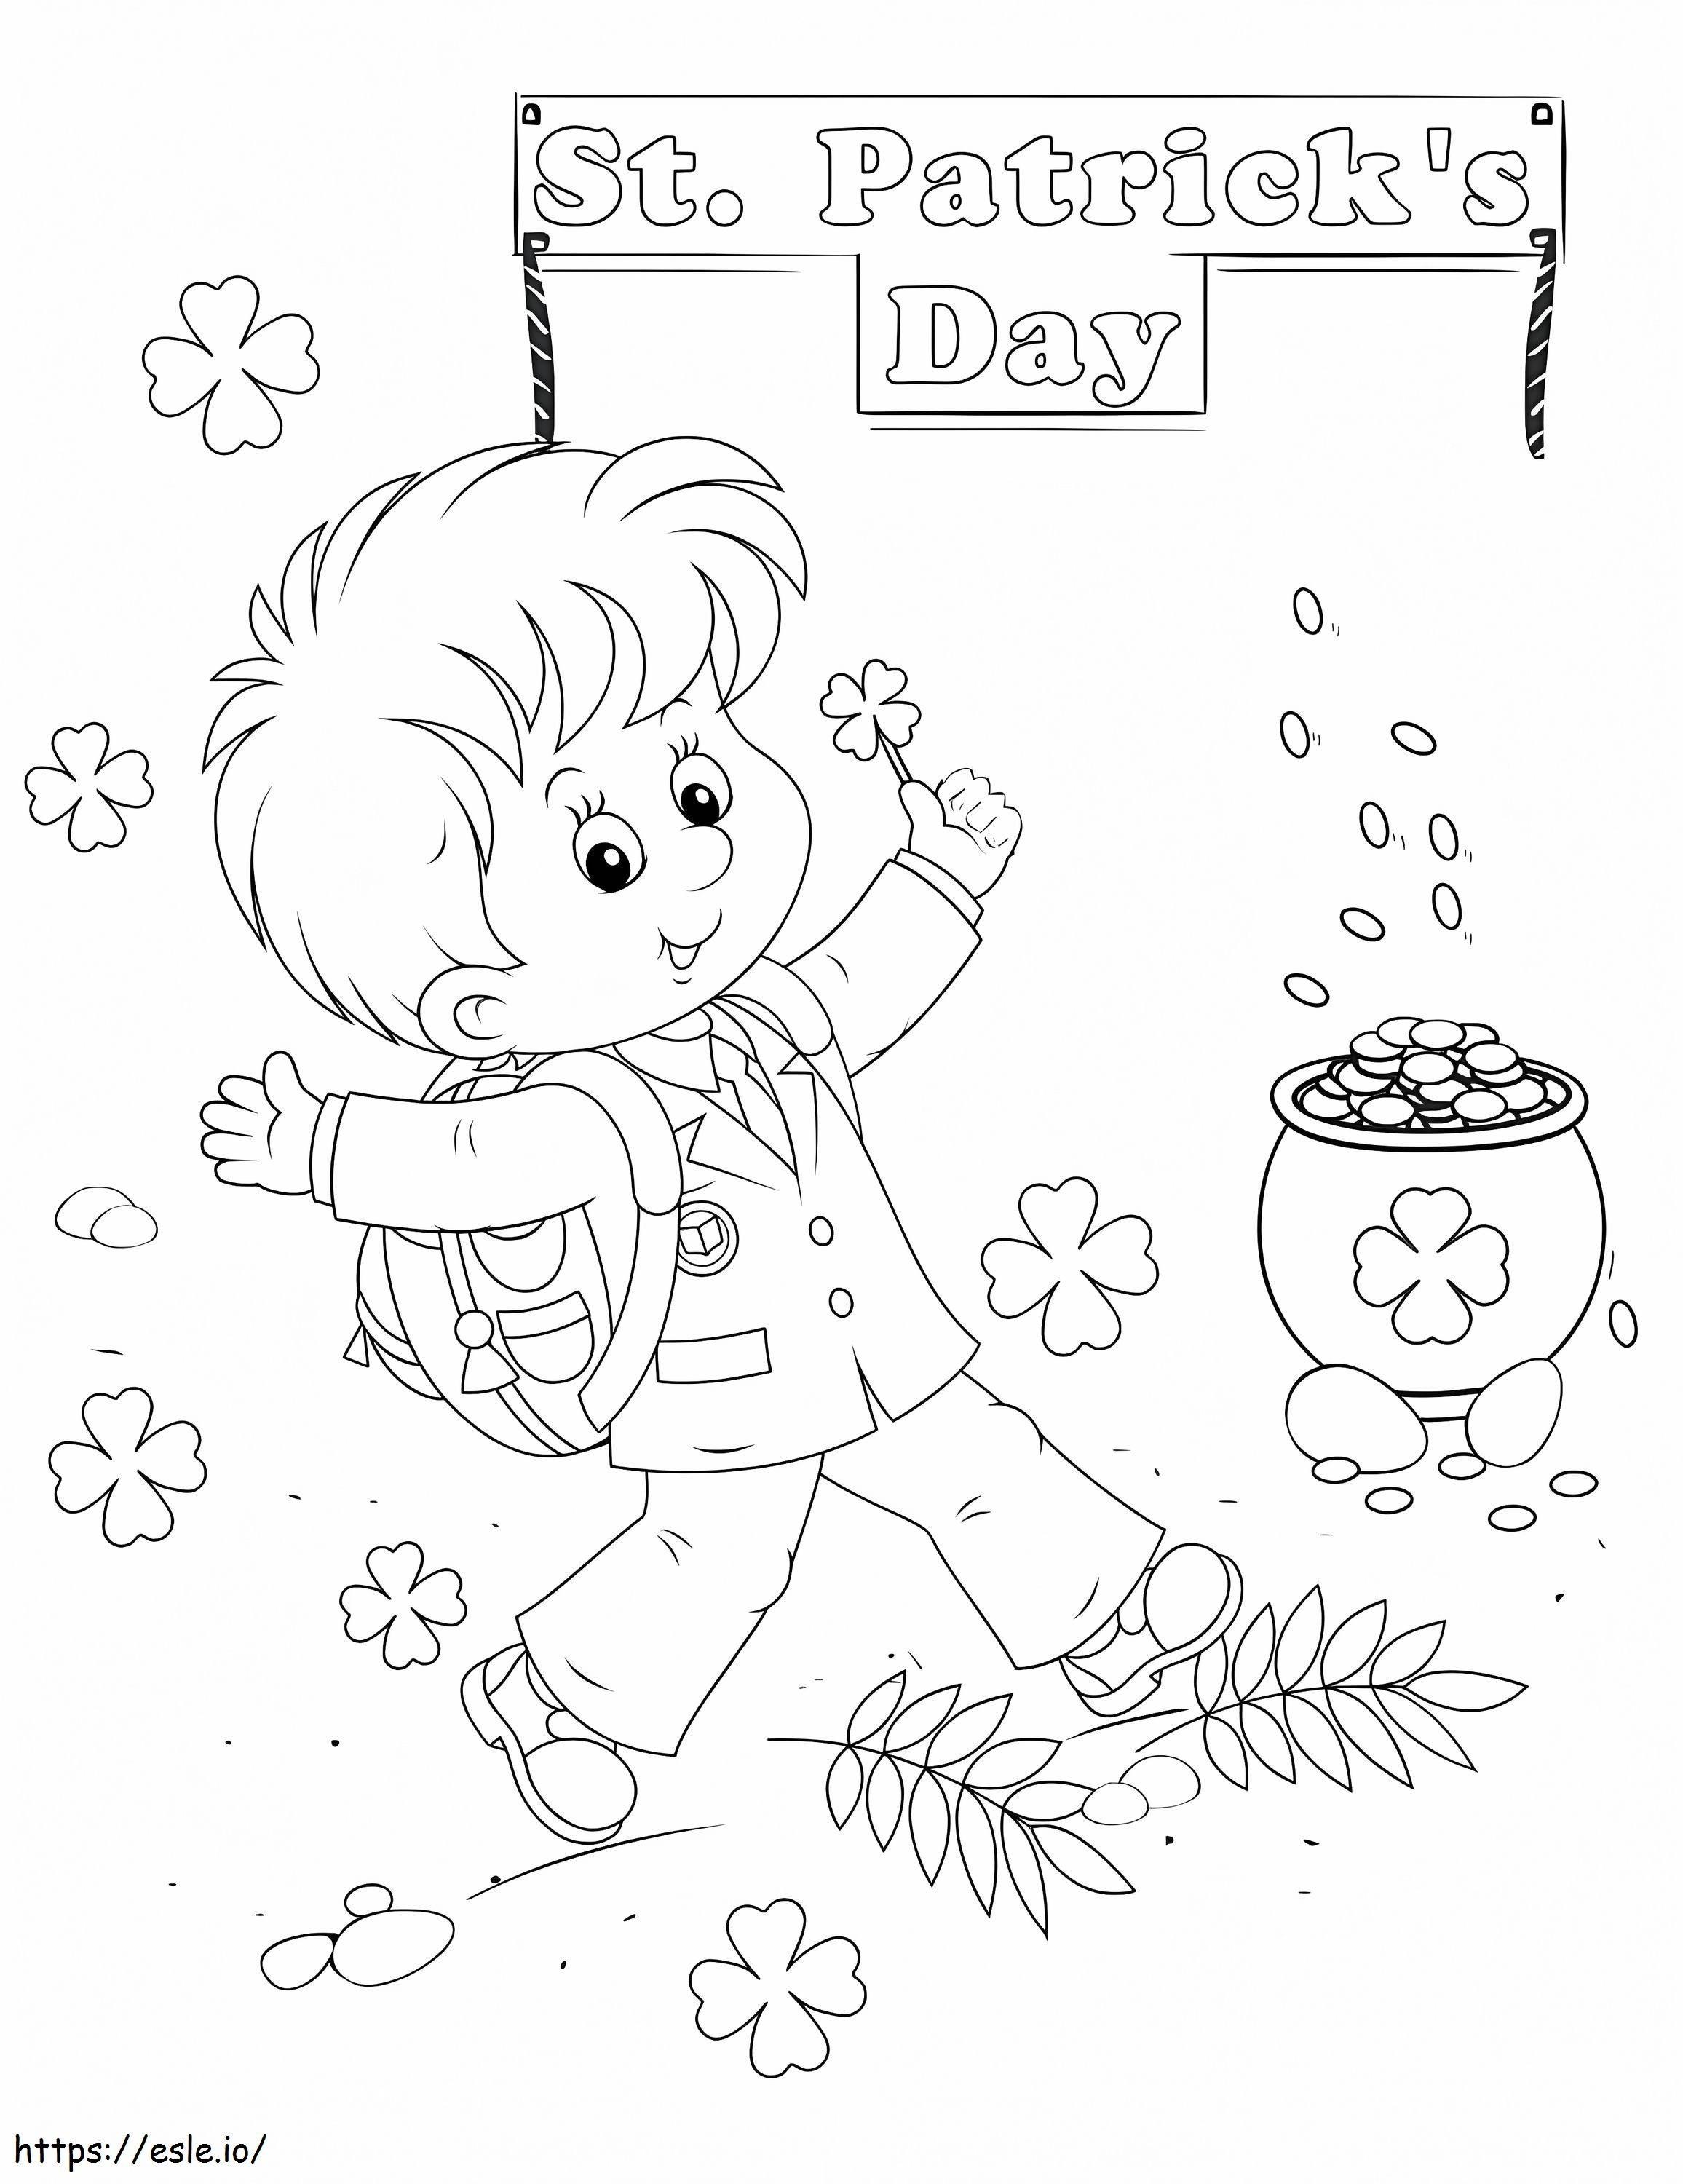 Boy In Saint Patricks Day coloring page